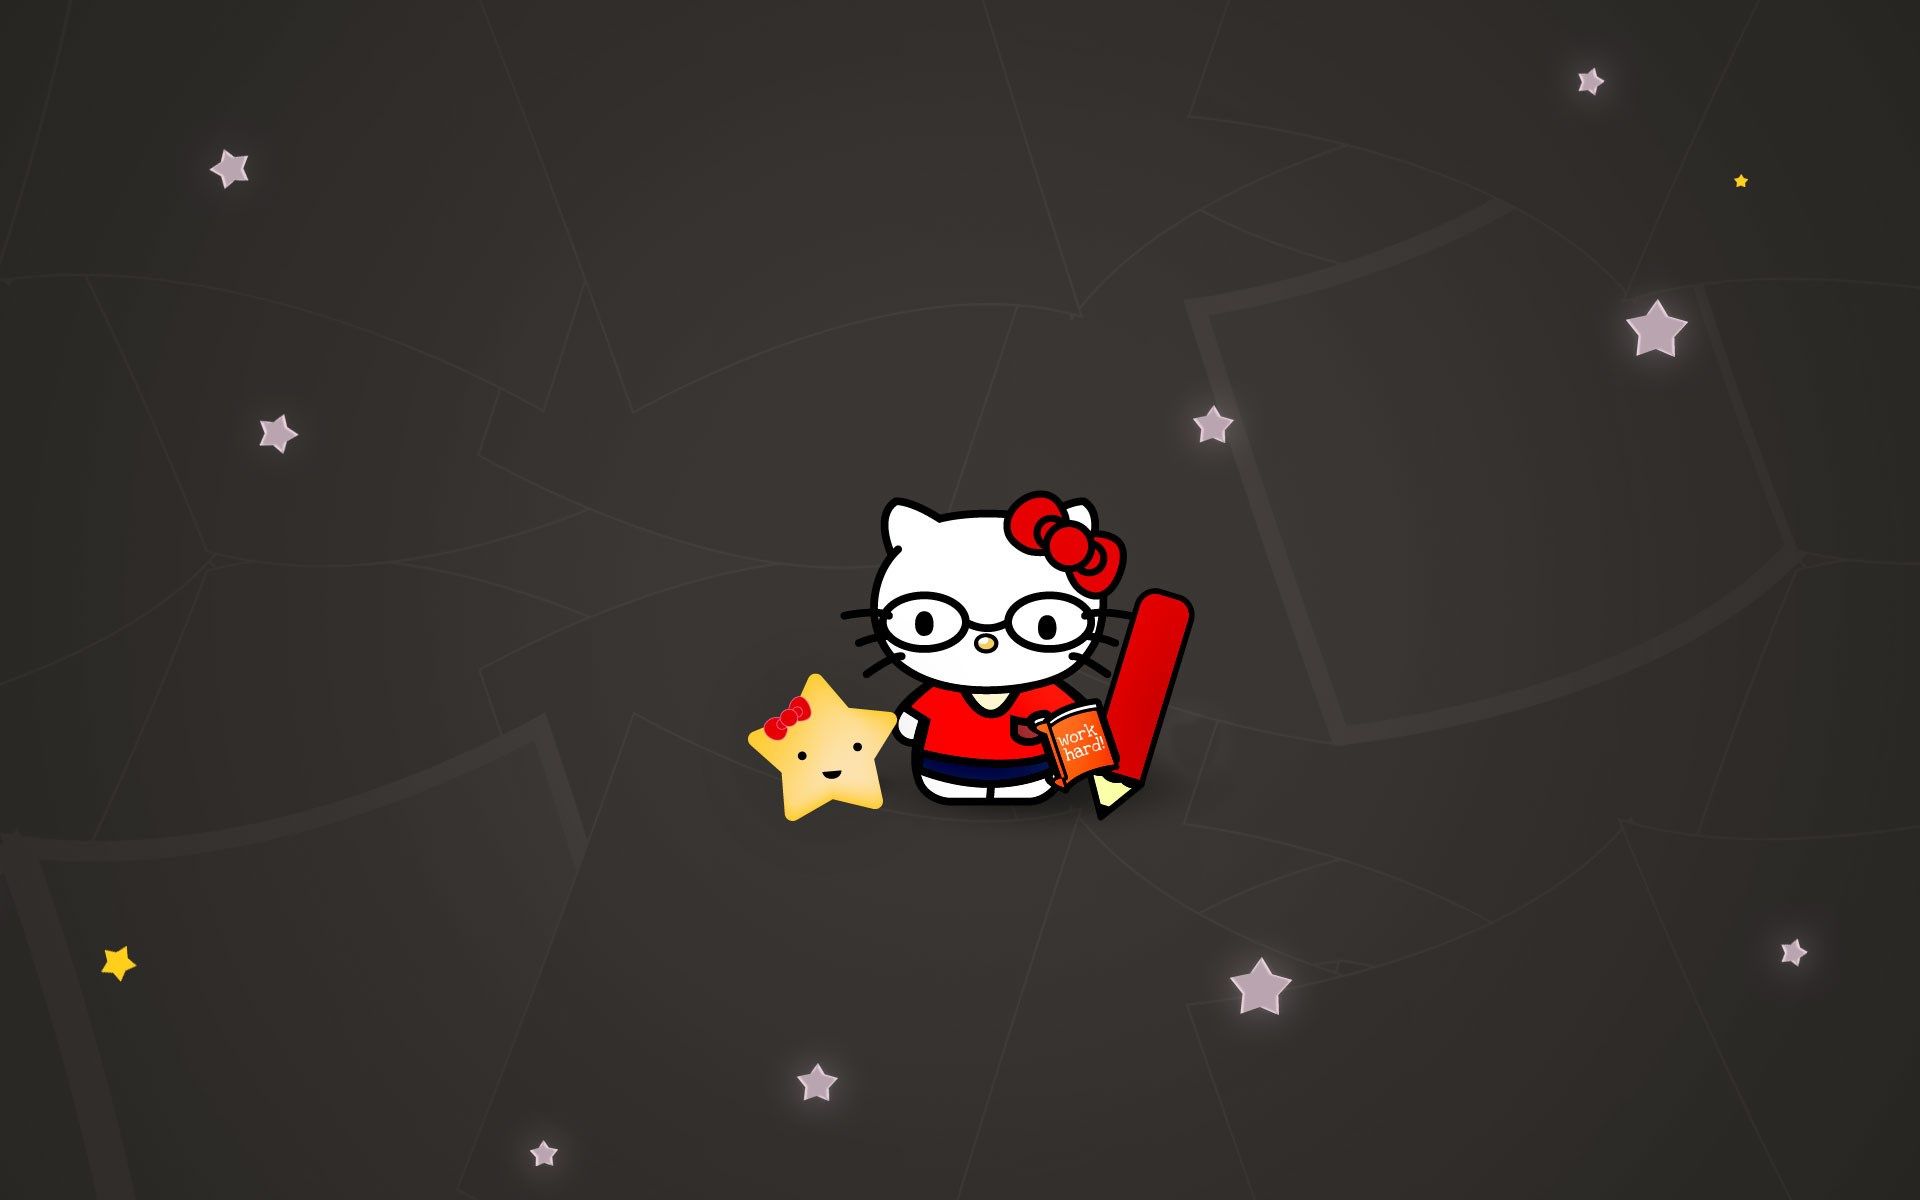 A hello kitty character is shown with stars in the background - Sanrio